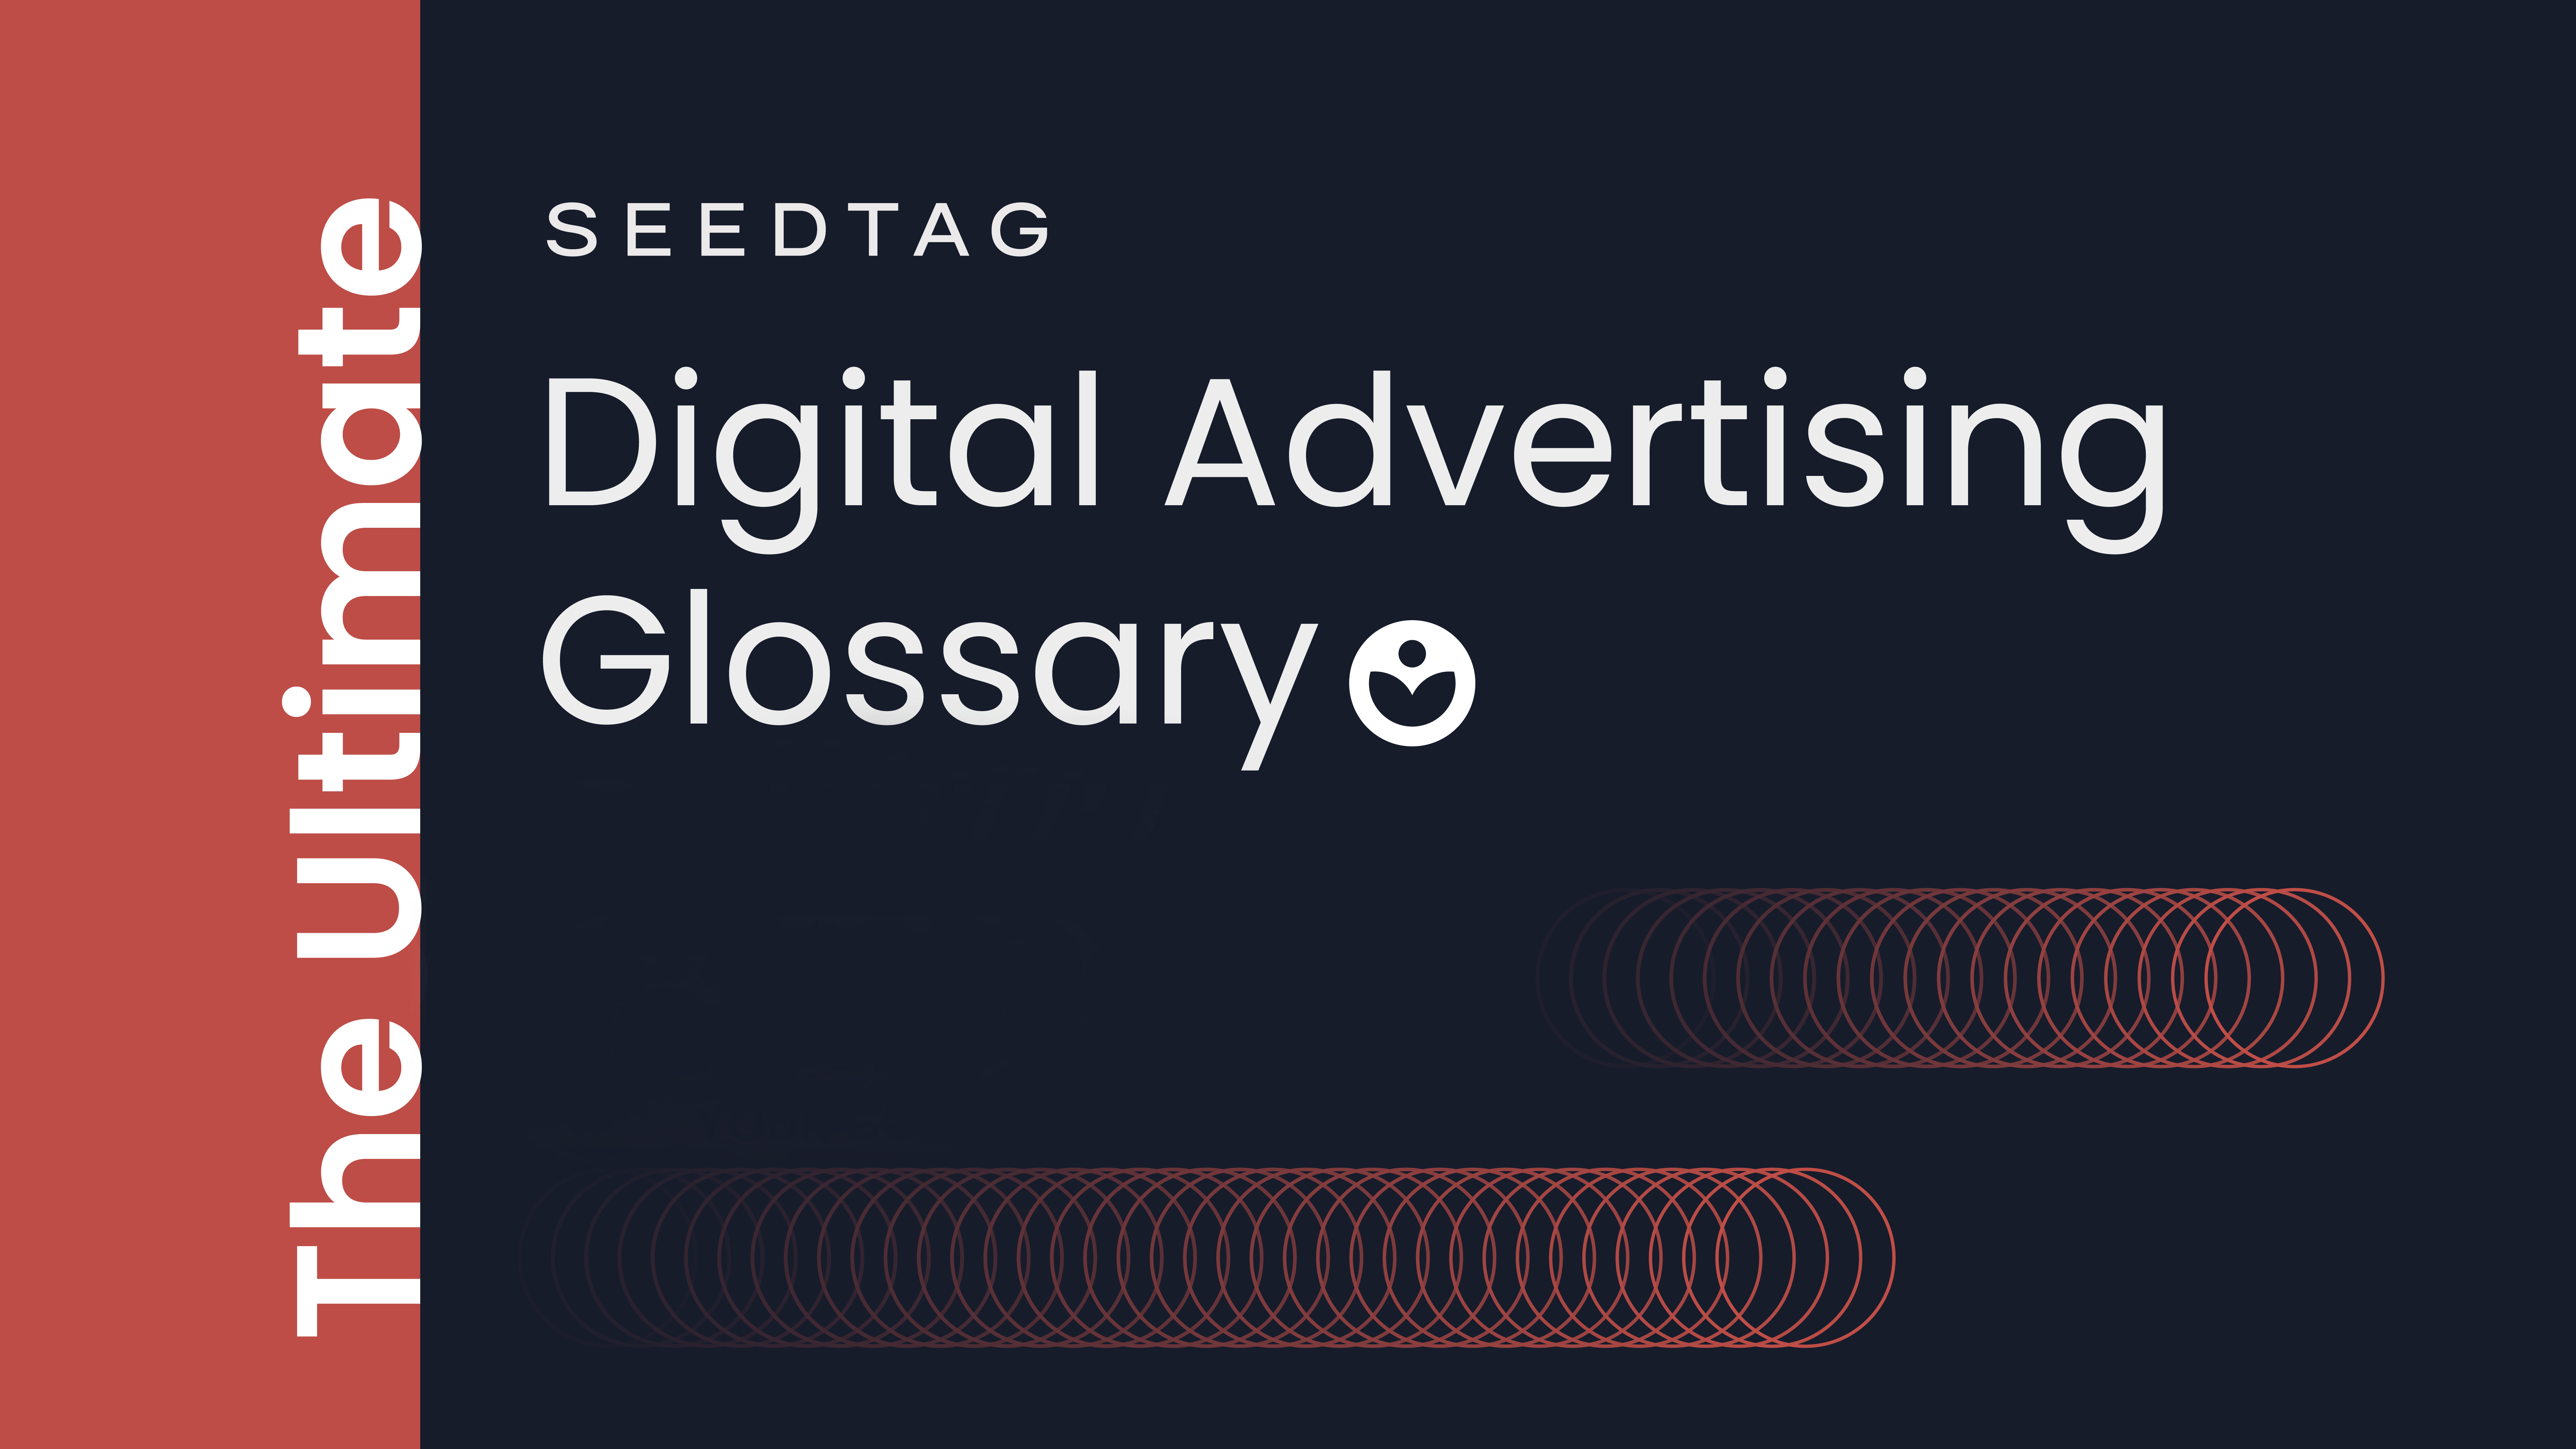 A sneak peek into Seedtag’s Digital Advertising Glossary